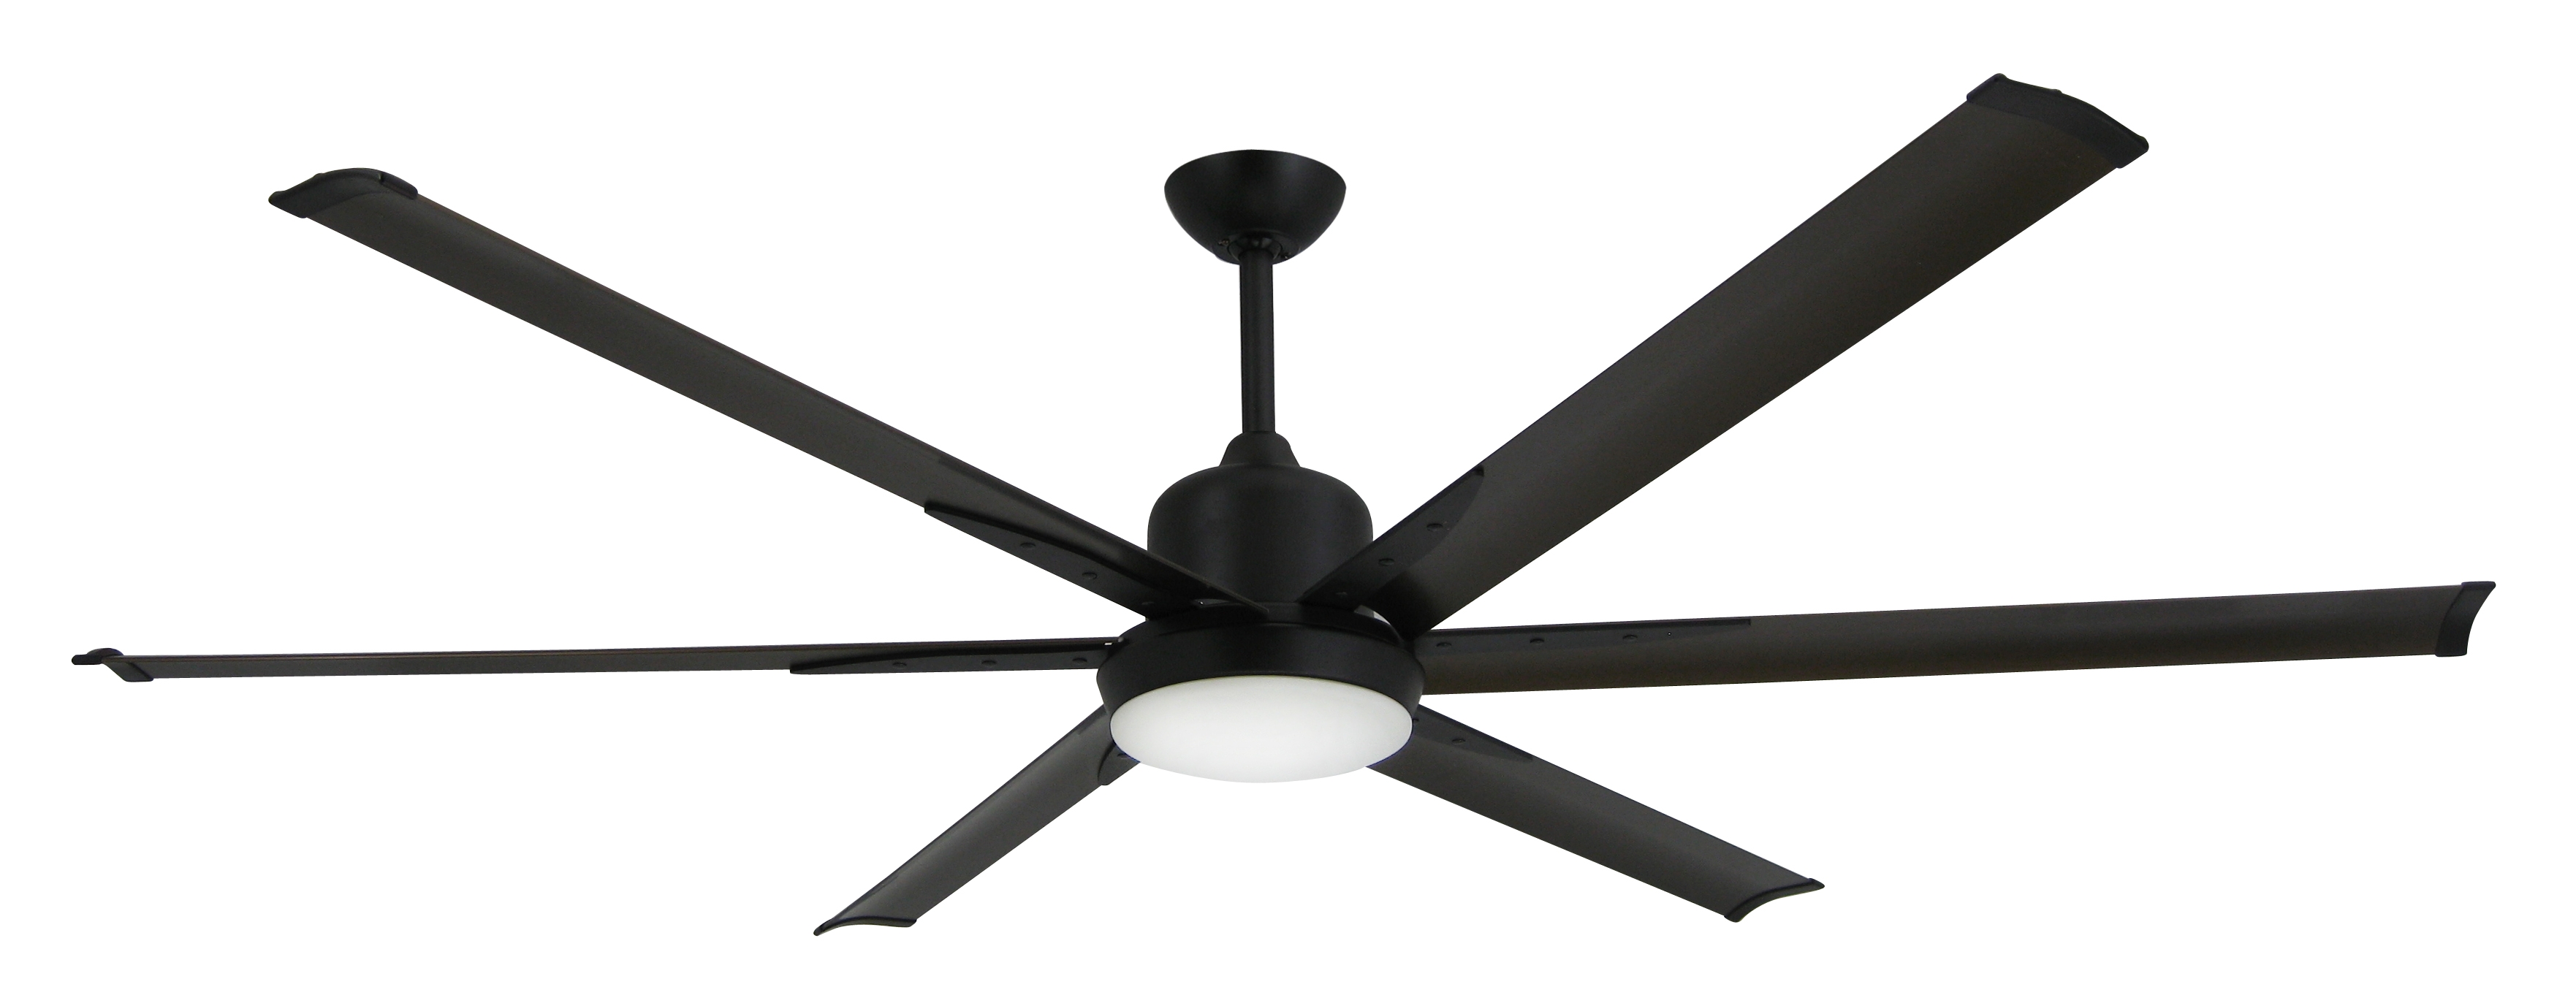 Large Outdoor Ceiling Fan With Light